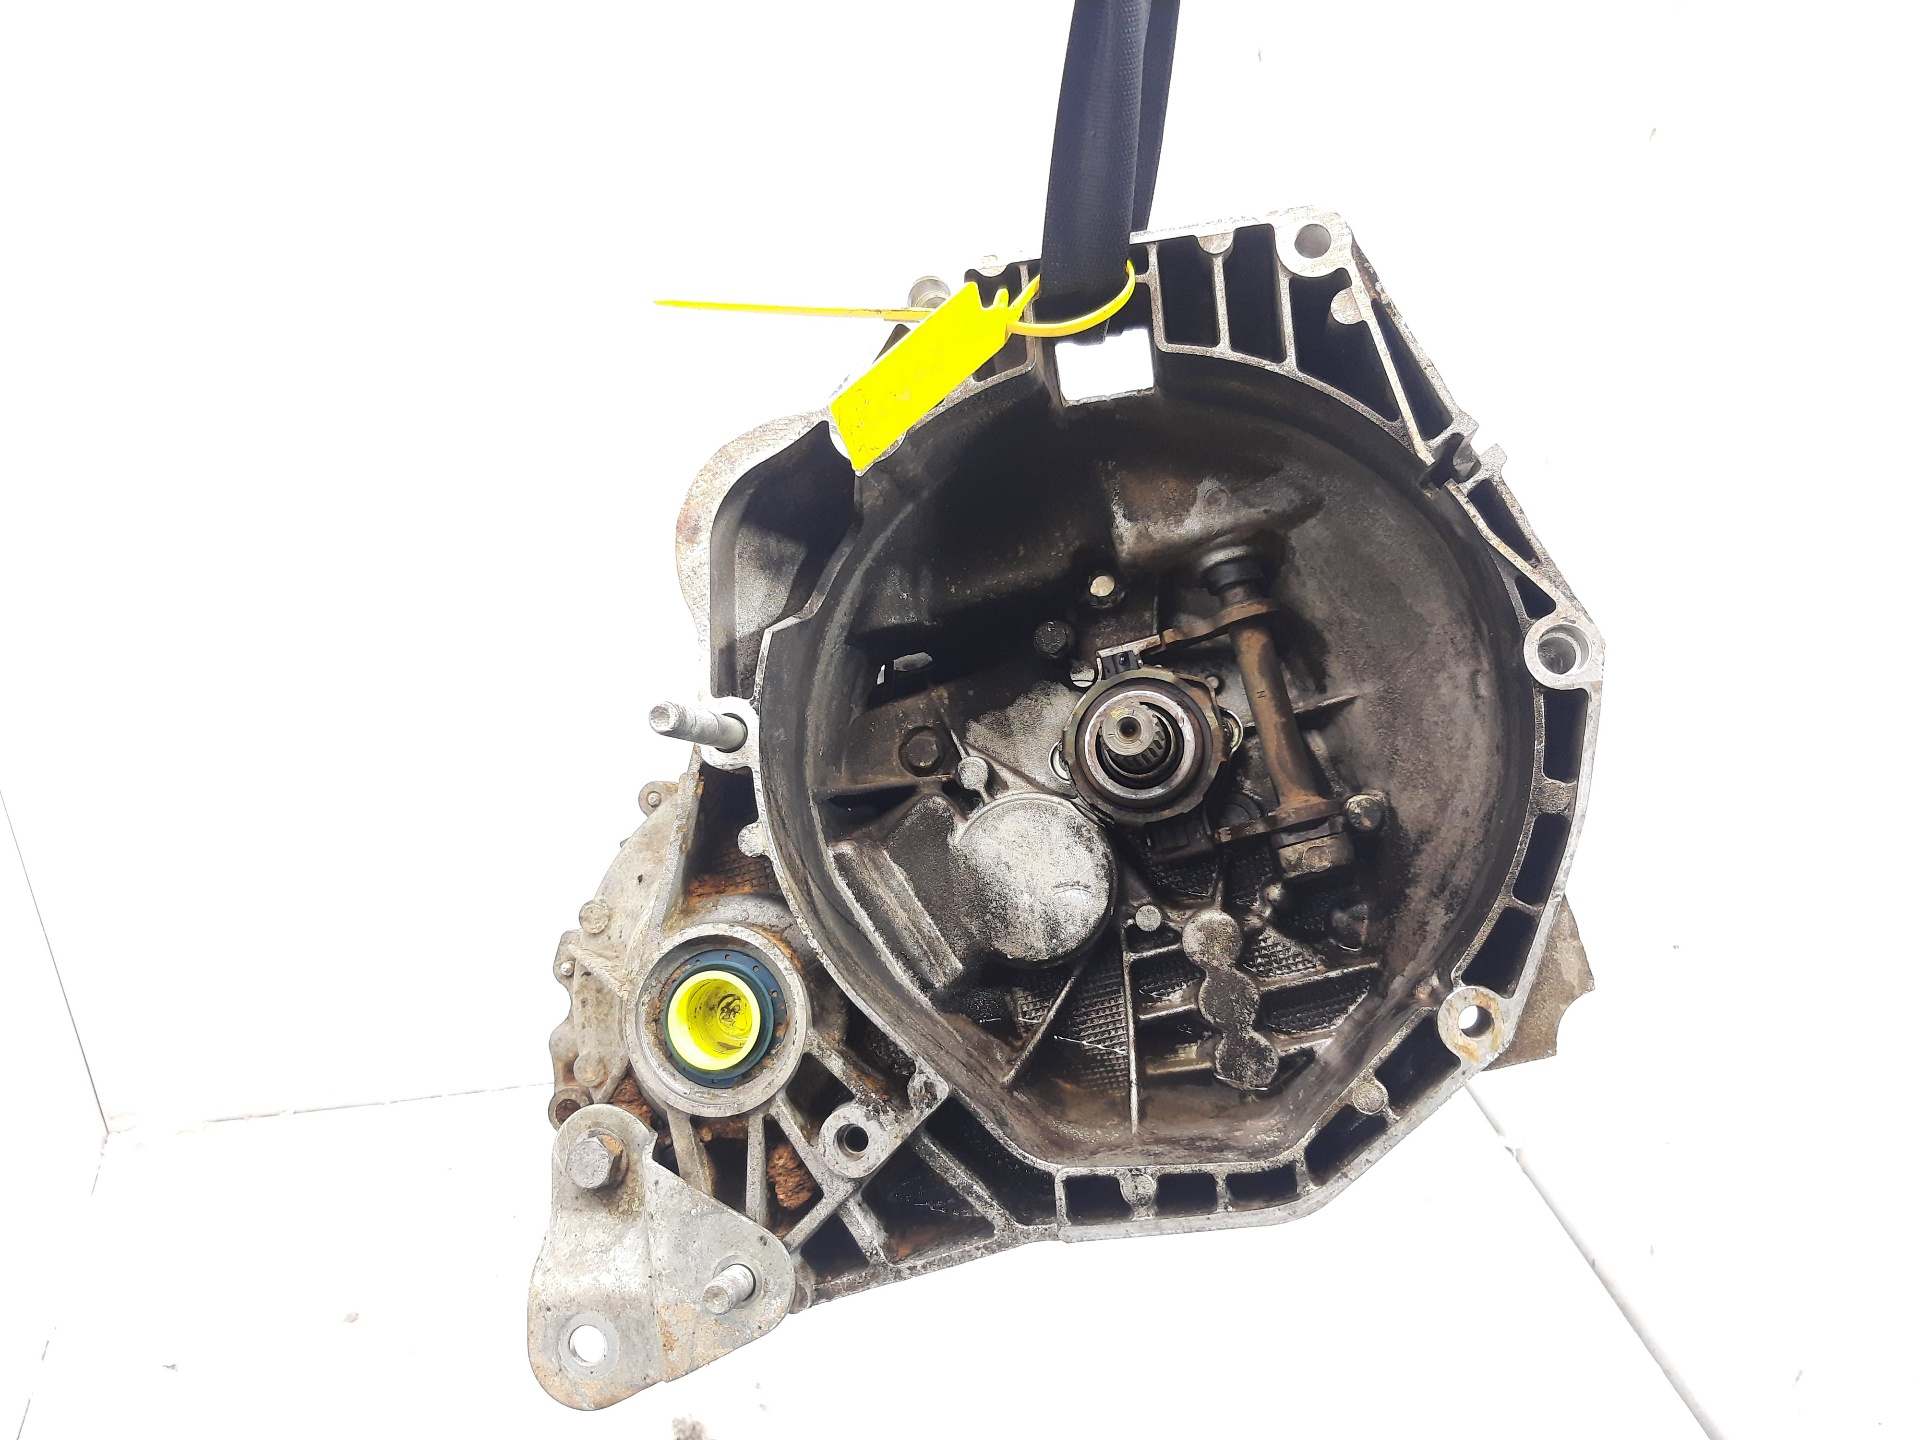 FIAT Punto 3 generation (2005-2020) Gearbox 188A9000, 5VELOCIDADES 24153816